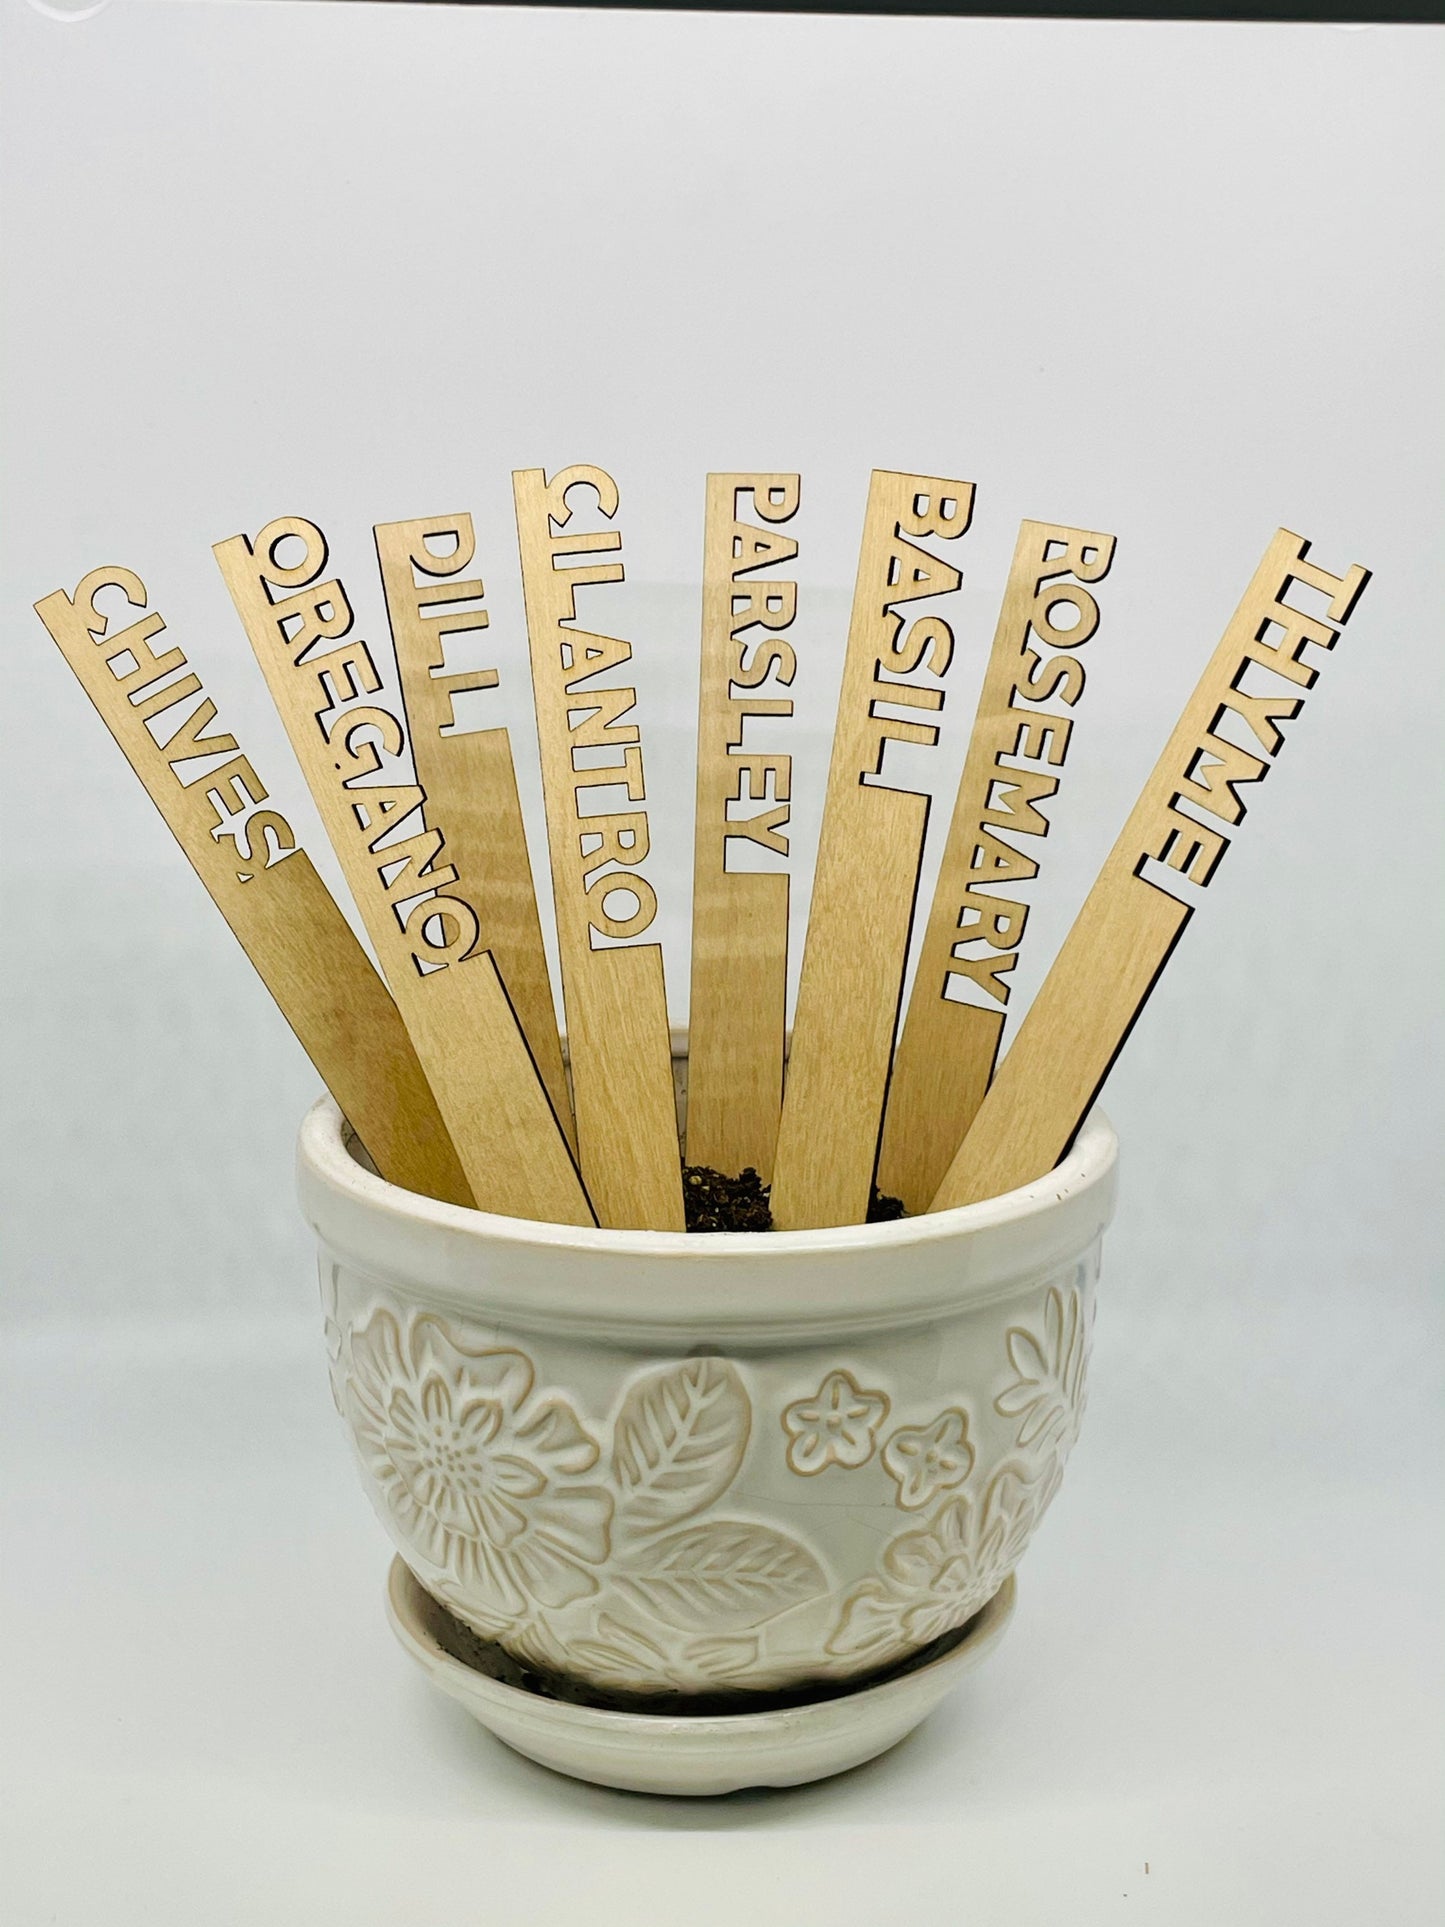 Herb Marker Set of 8 Eco Friendly Garden Christmas Gift Sustainable Gifts Stocking Stuffer Small Gifts